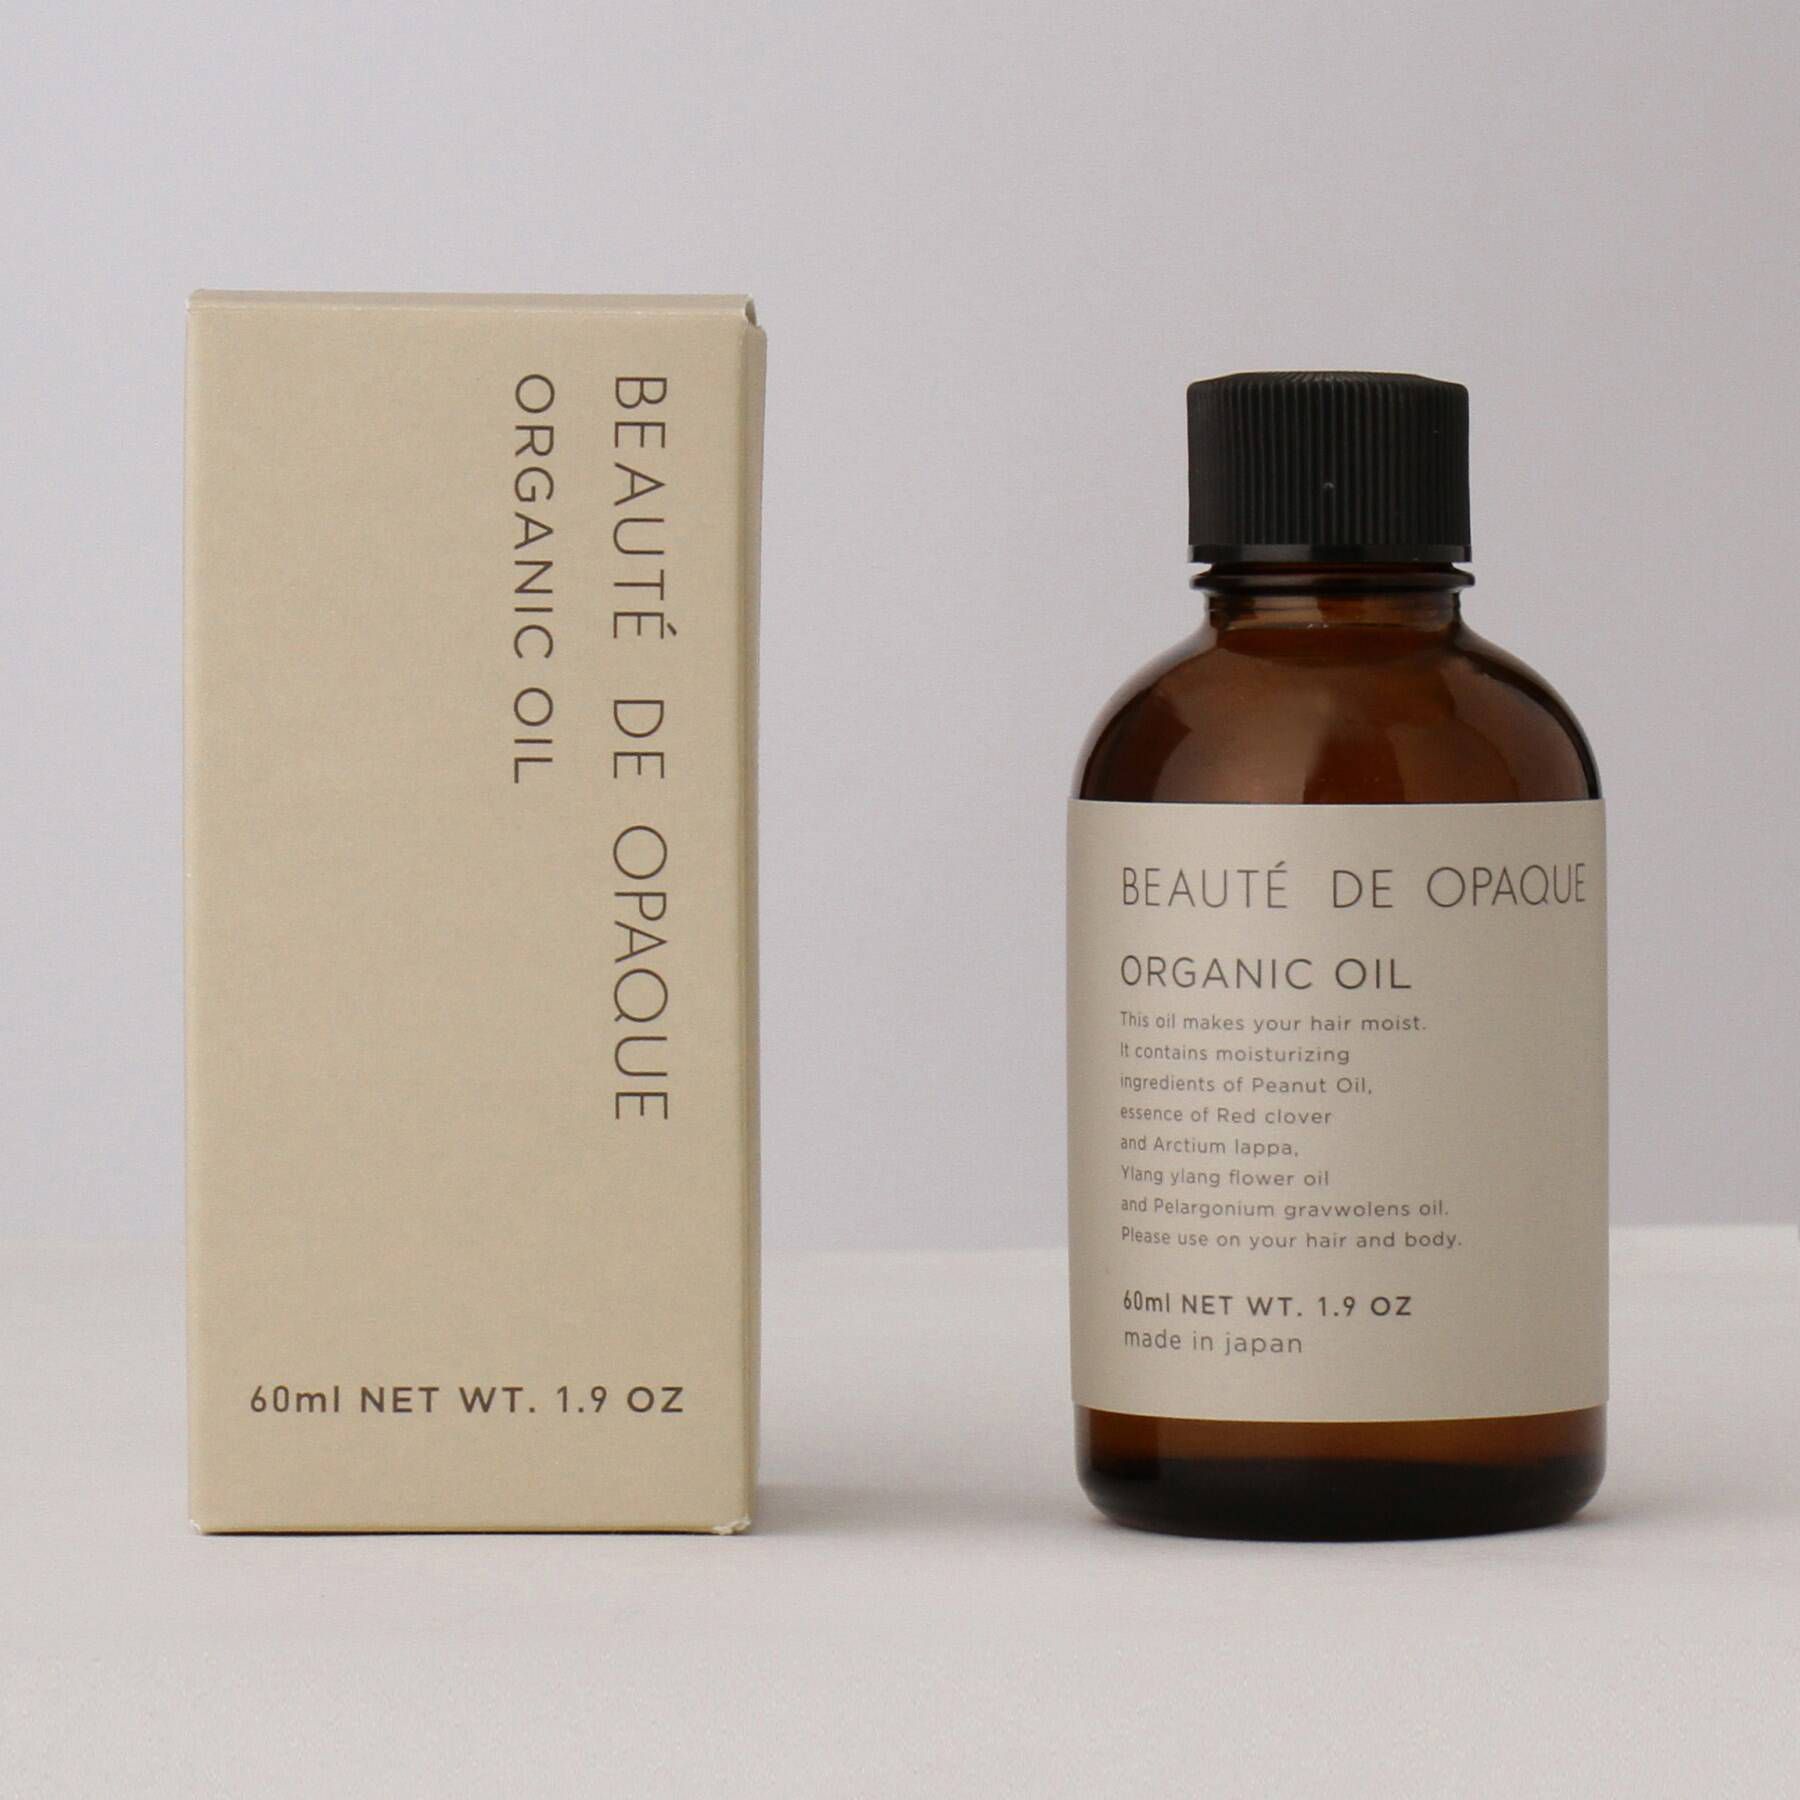 BEAUTE DE OPAQUE COSME(オペーク ドット クリップ)/ヘア・スキンオイル BEAUTE DE OPAQUE produced by Cosme Kitchen